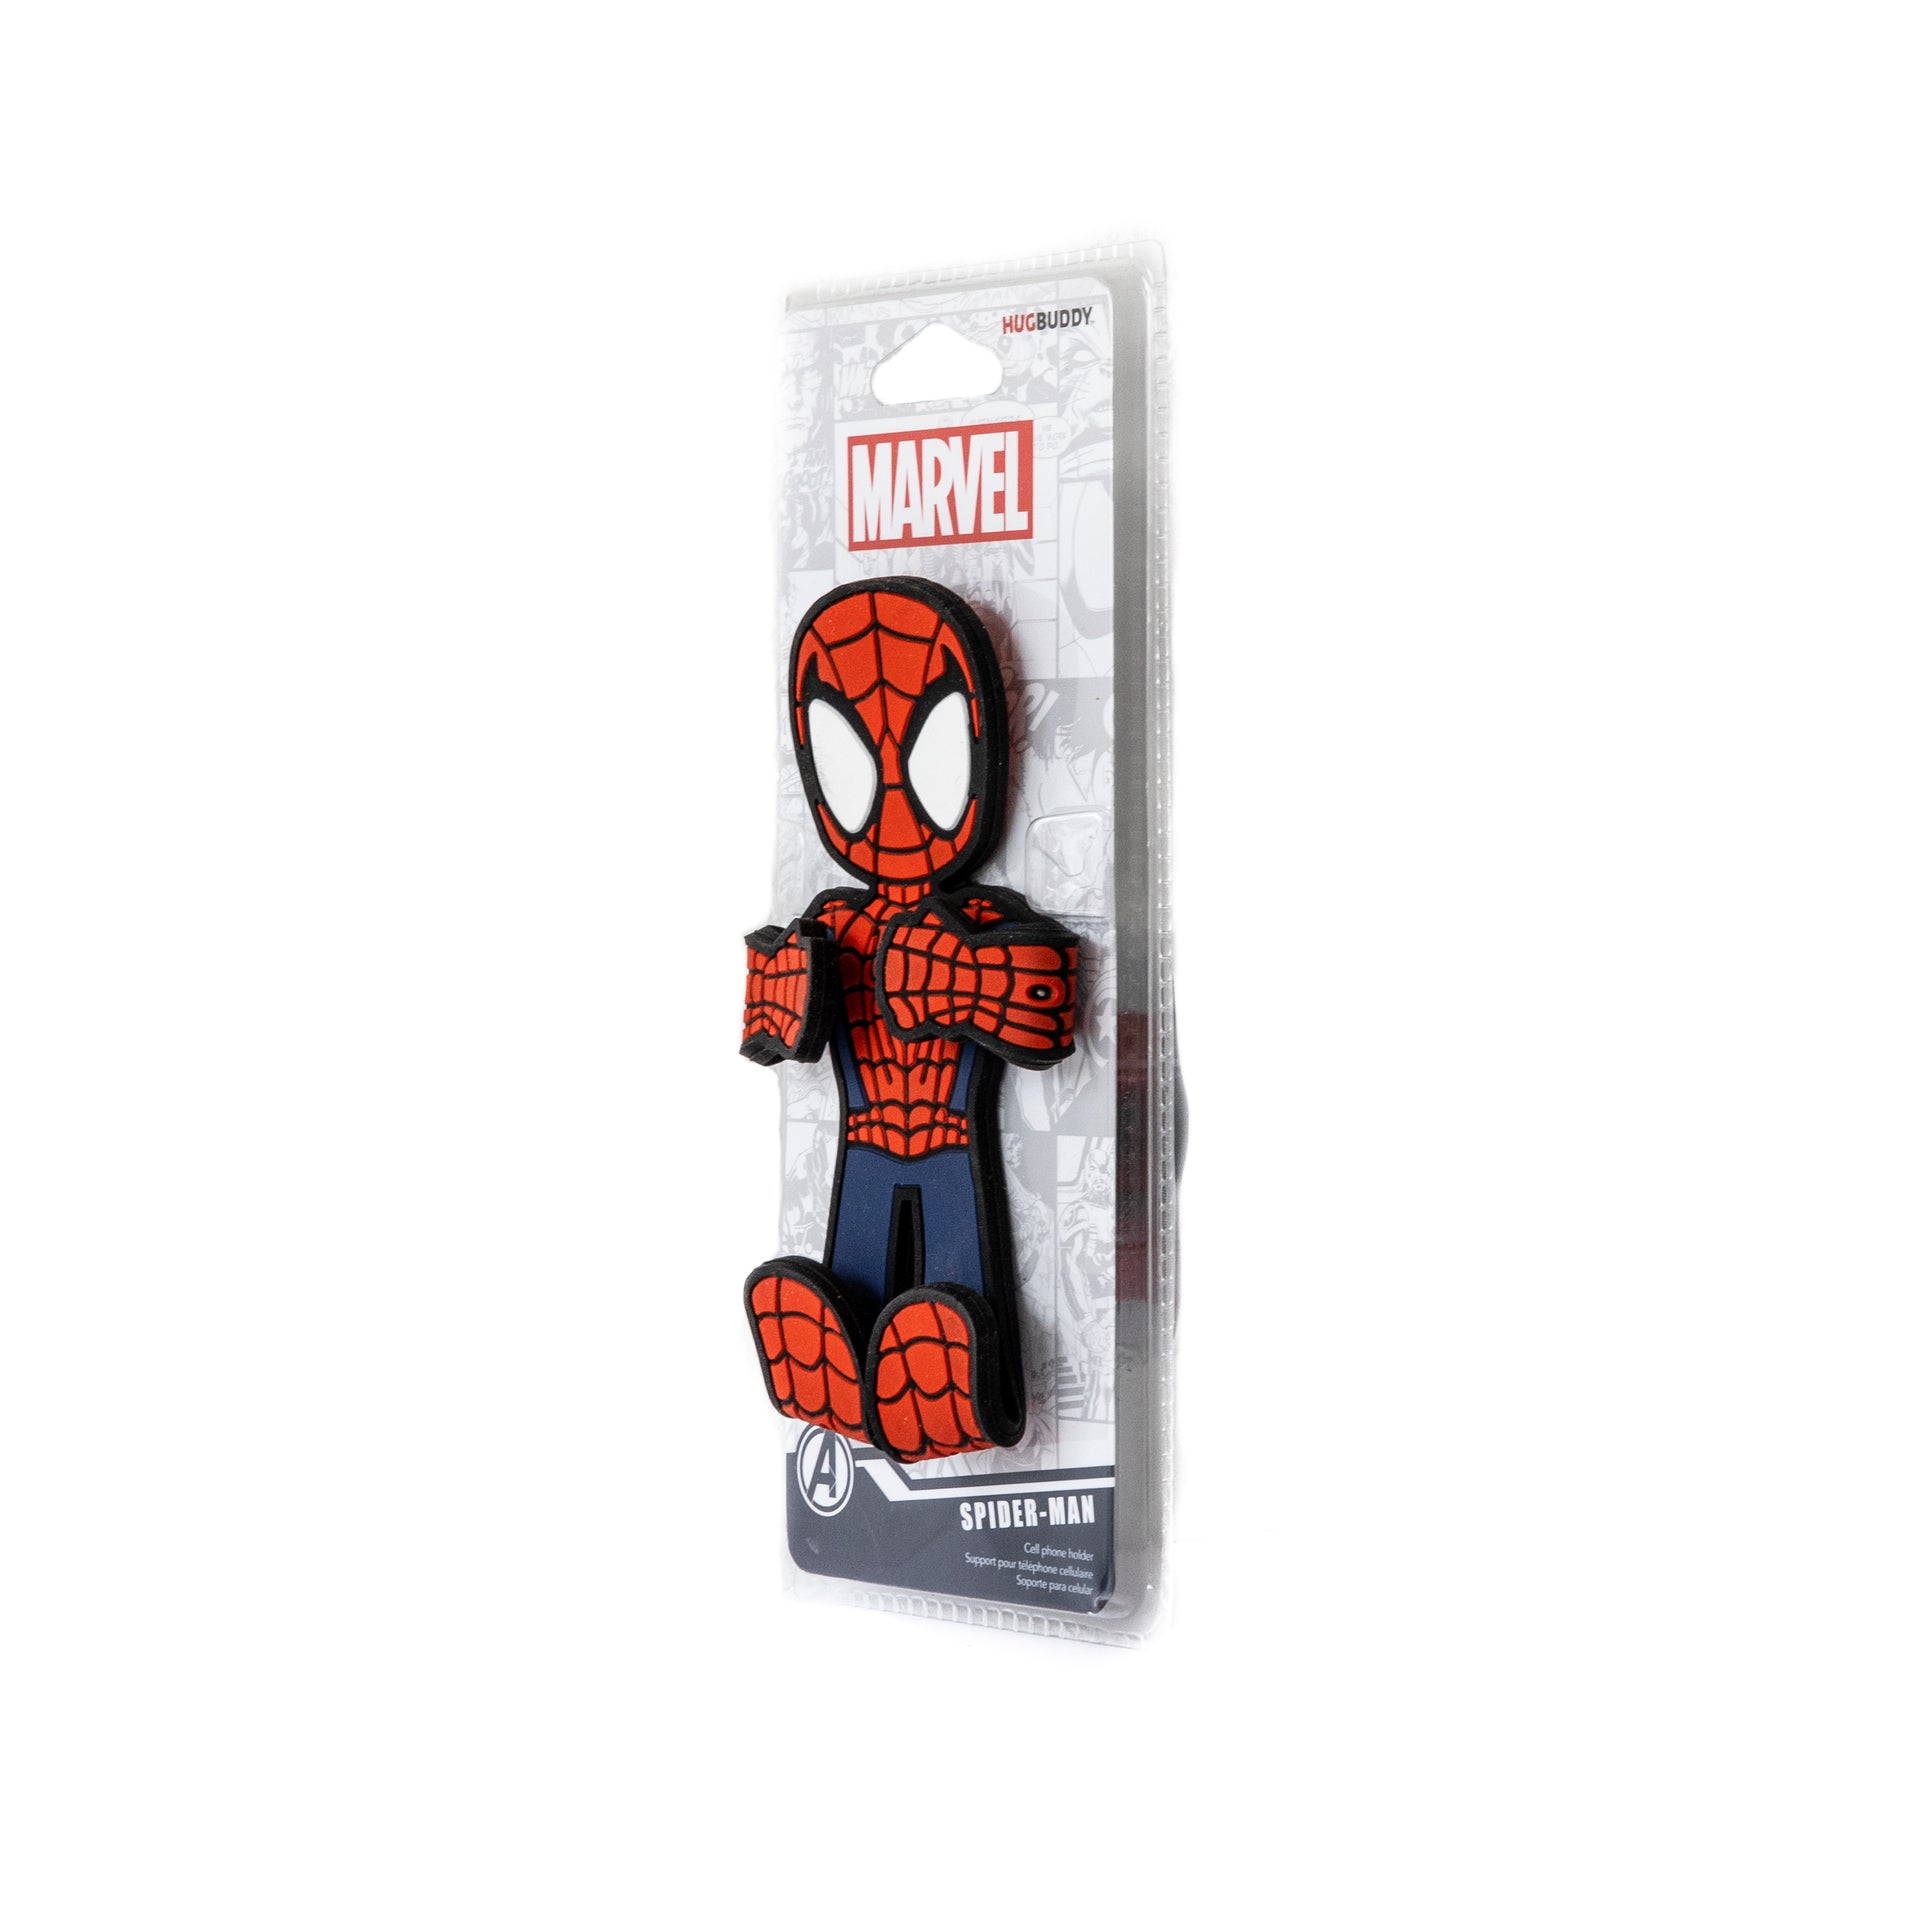 Image of Marvel Comics Spider-Man Hug Buddy packaging 45 degree angle side view